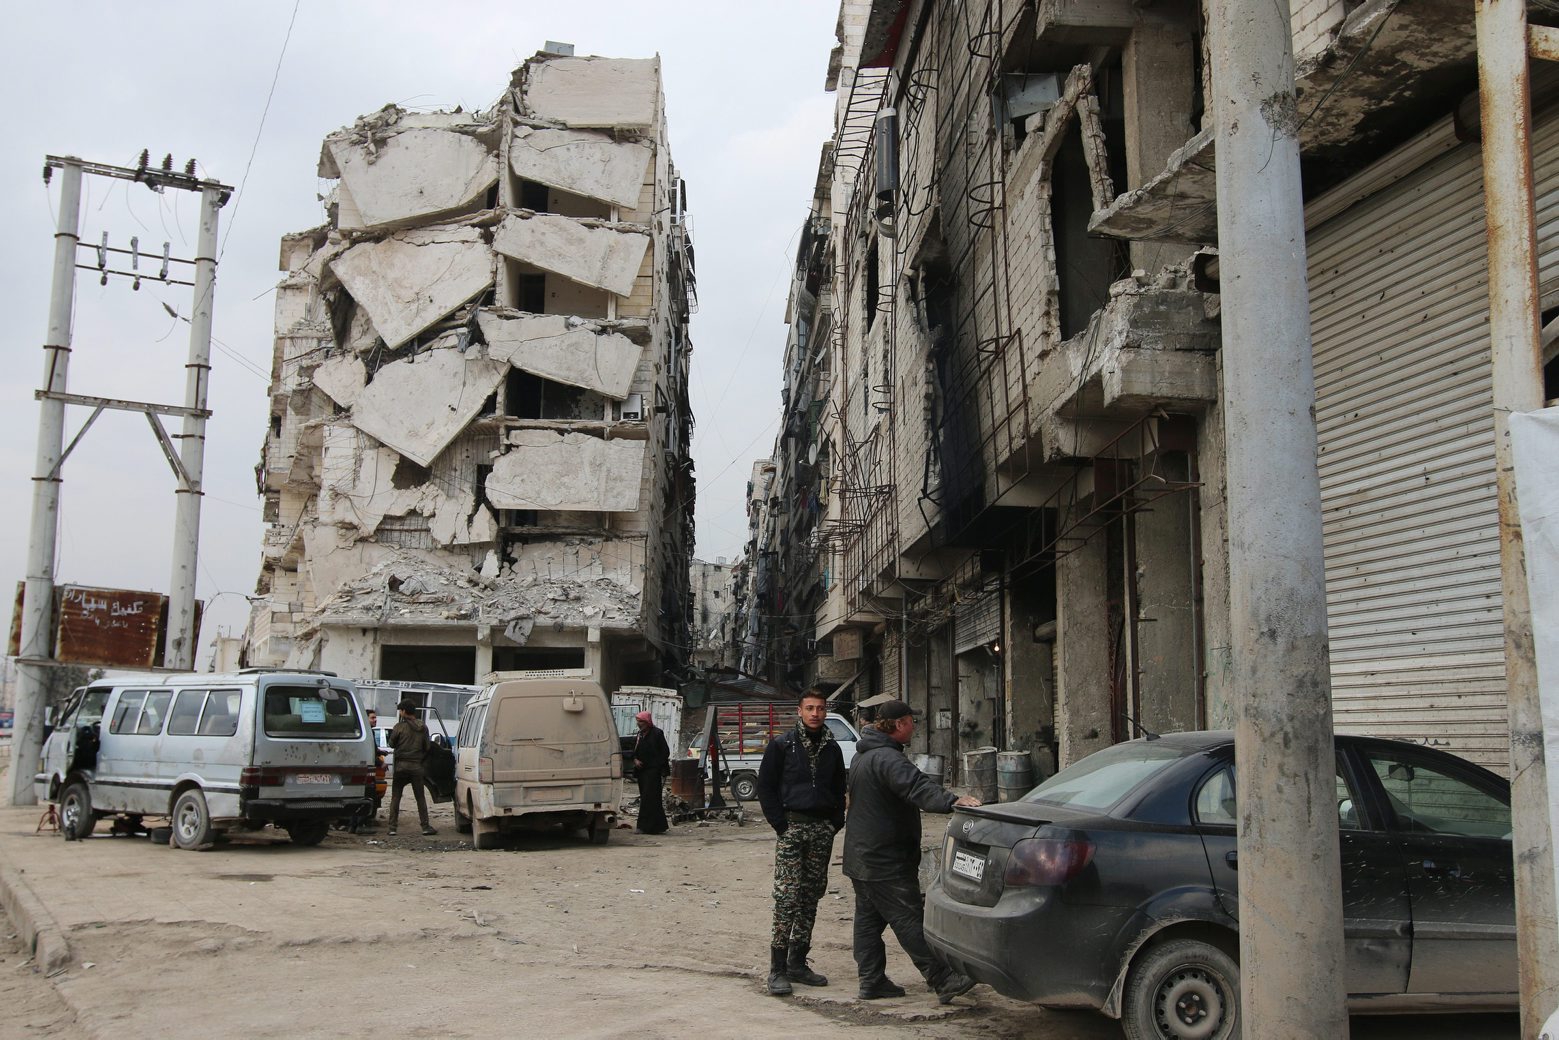 In this Thursday, Feb. 11, 2016 photo, a building is seen with heavy damage in Aleppo, Syria. The fighting around Syria's largest city of Aleppo has brought government forces closer to the Turkish border than at any point in recent years, routing rebels from key areas and creating a humanitarian disaster as tens of thousands of people flee. (Alexander Kots/Komsomolskaya Pravda via AP) Mideast Syria